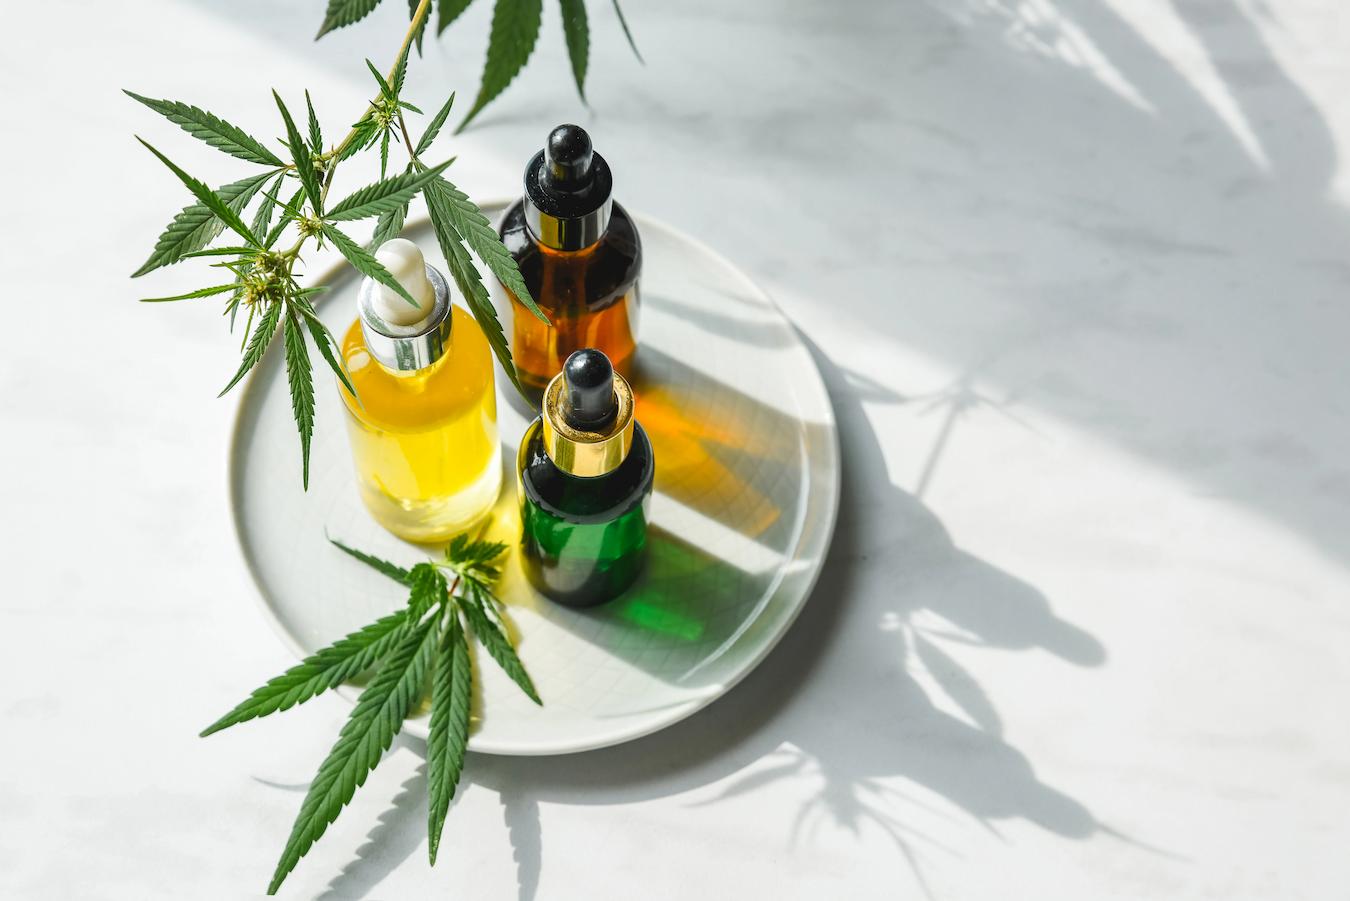 various glass dropper bottles of cbd oil stress relief integrated cbd and meditation relaxation breath mood stress anxiety daily life hemp plant